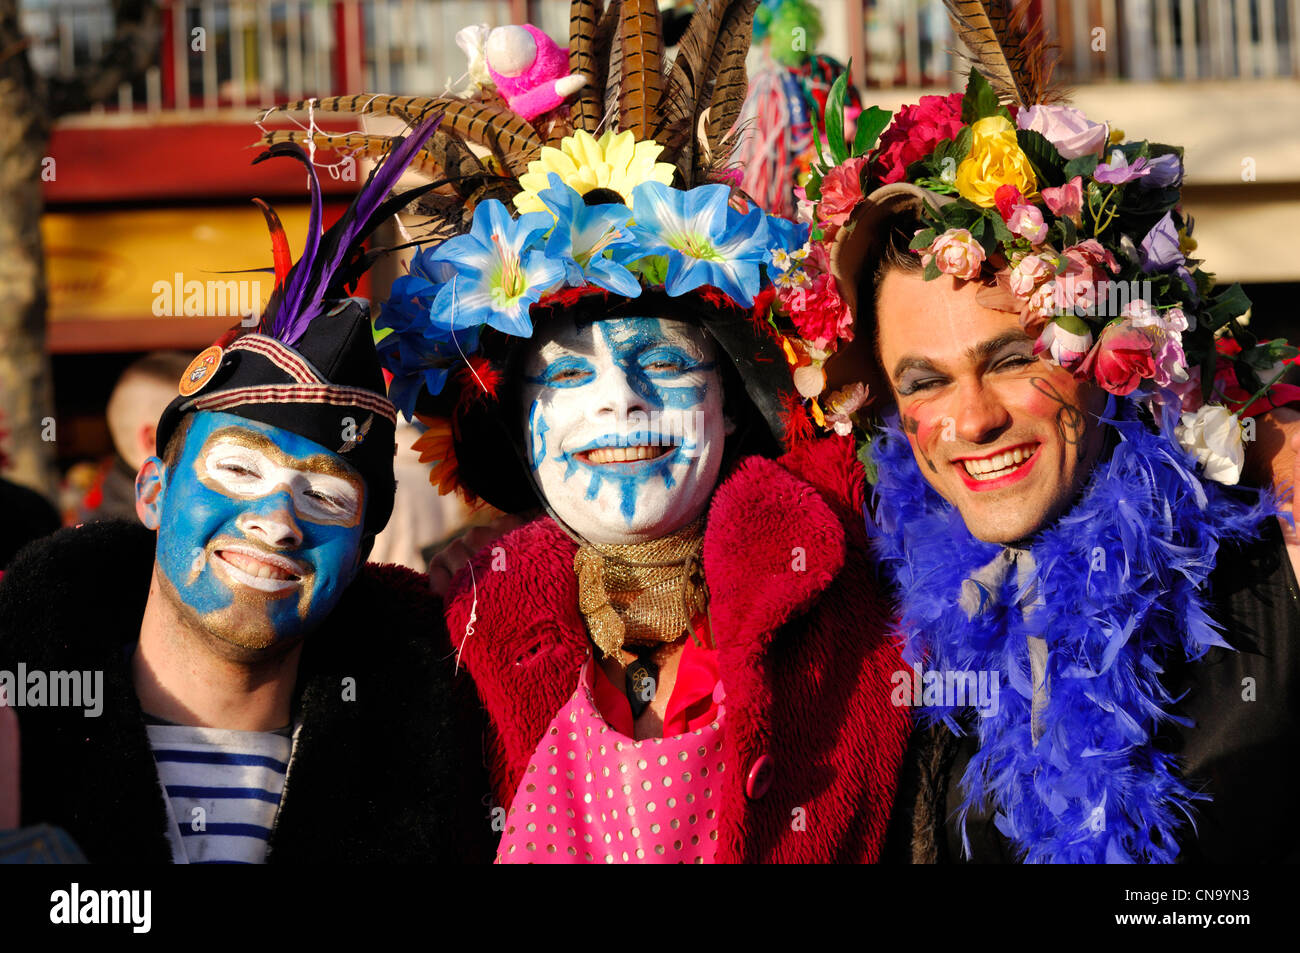 France, Nord, Dunkirk, carnival of Dunkirk, carnival goers with colorful disguises Stock Photo